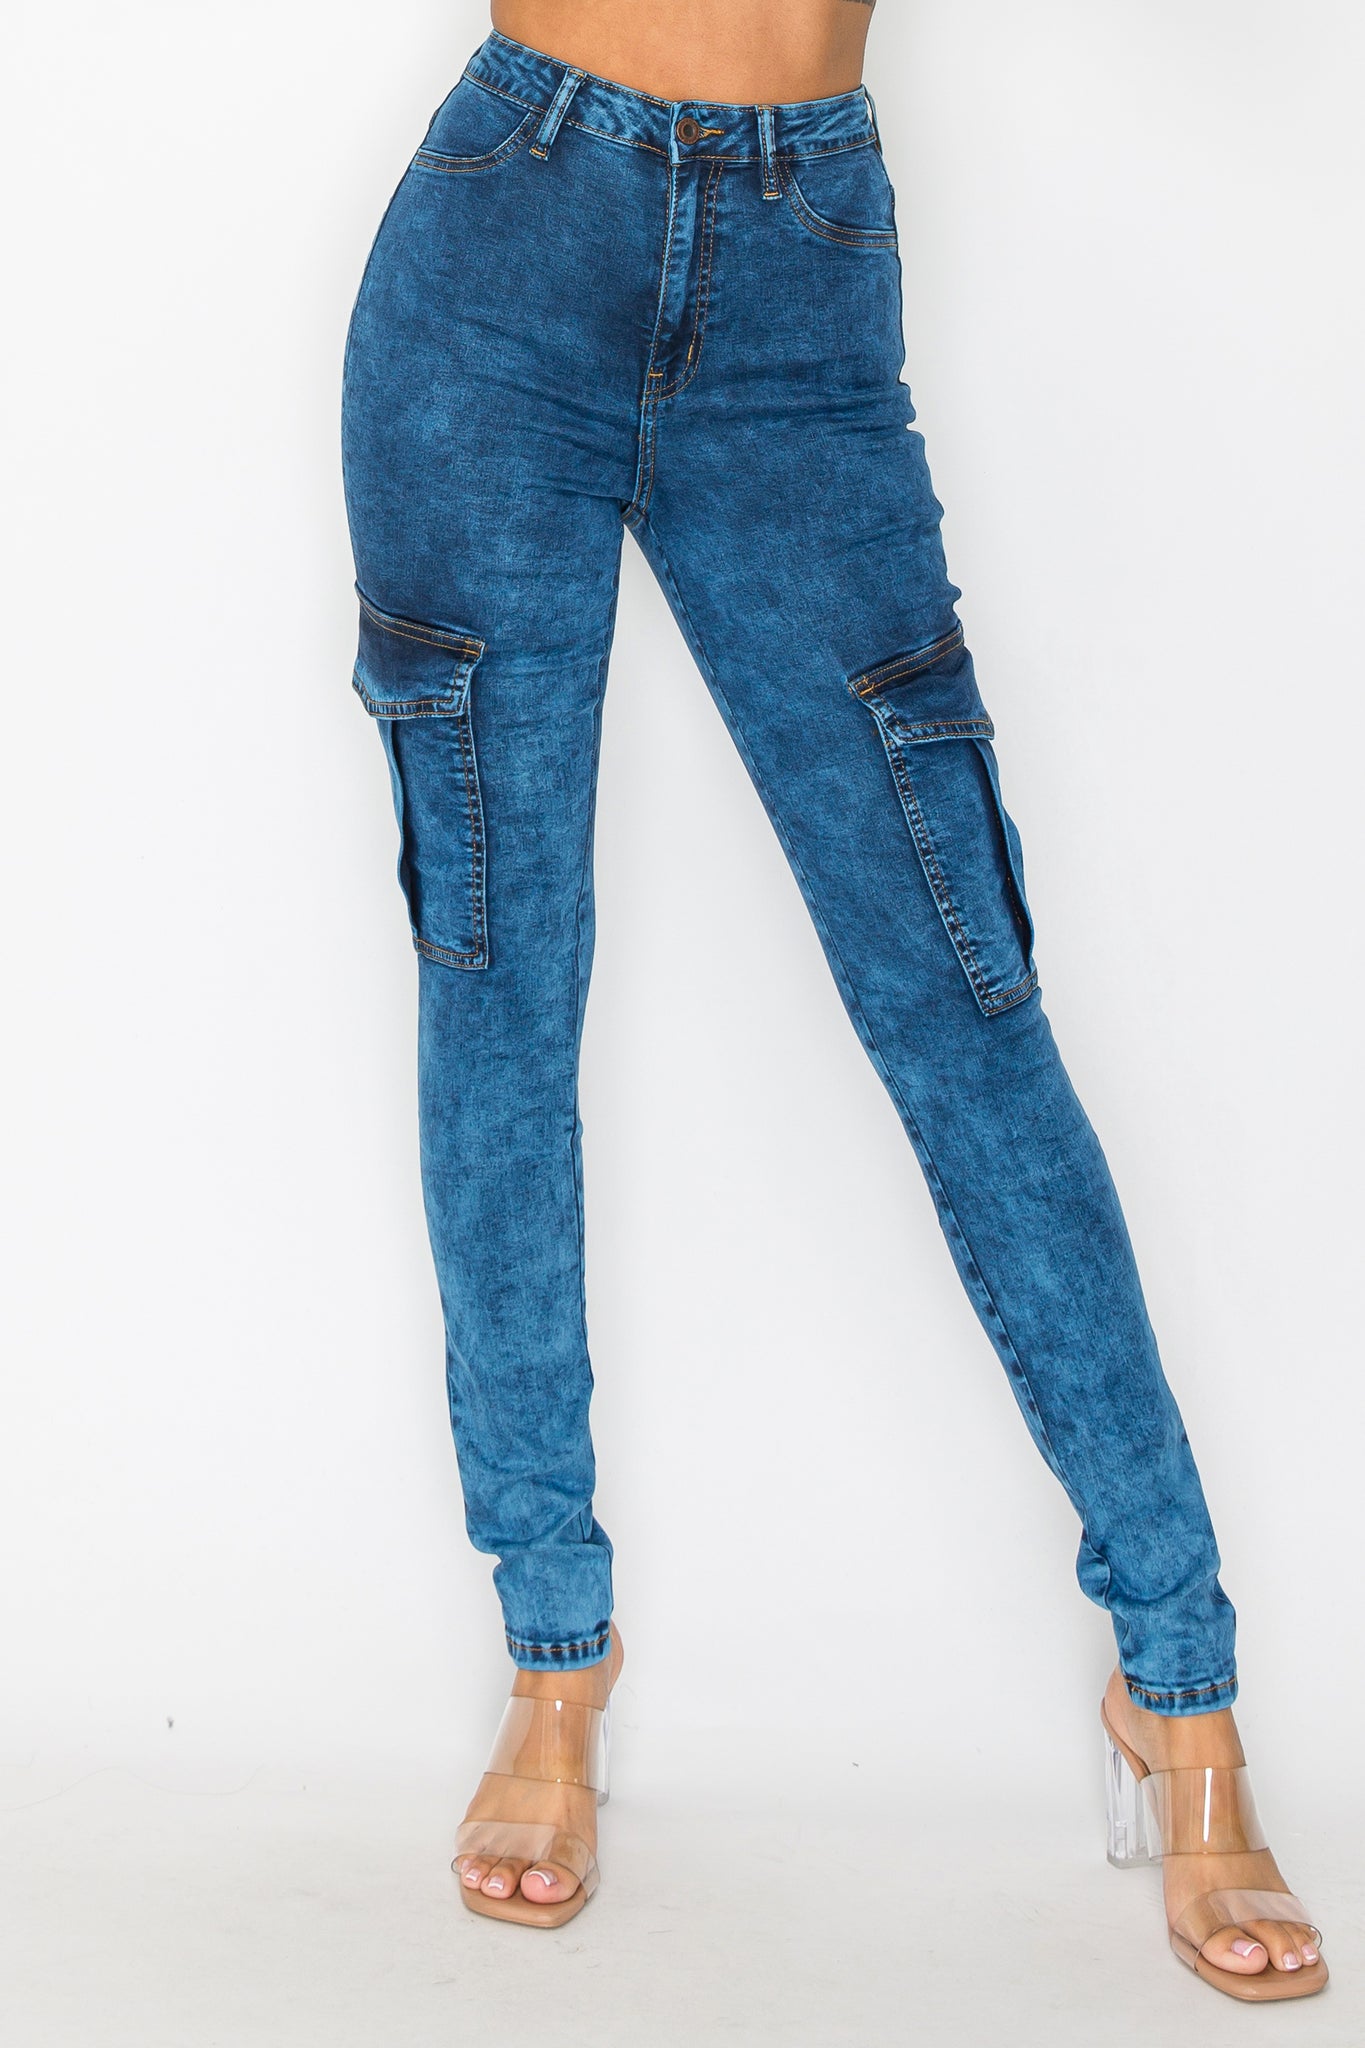 40577 Women's High Rise Acid Washed Skinny Cargo Jeans